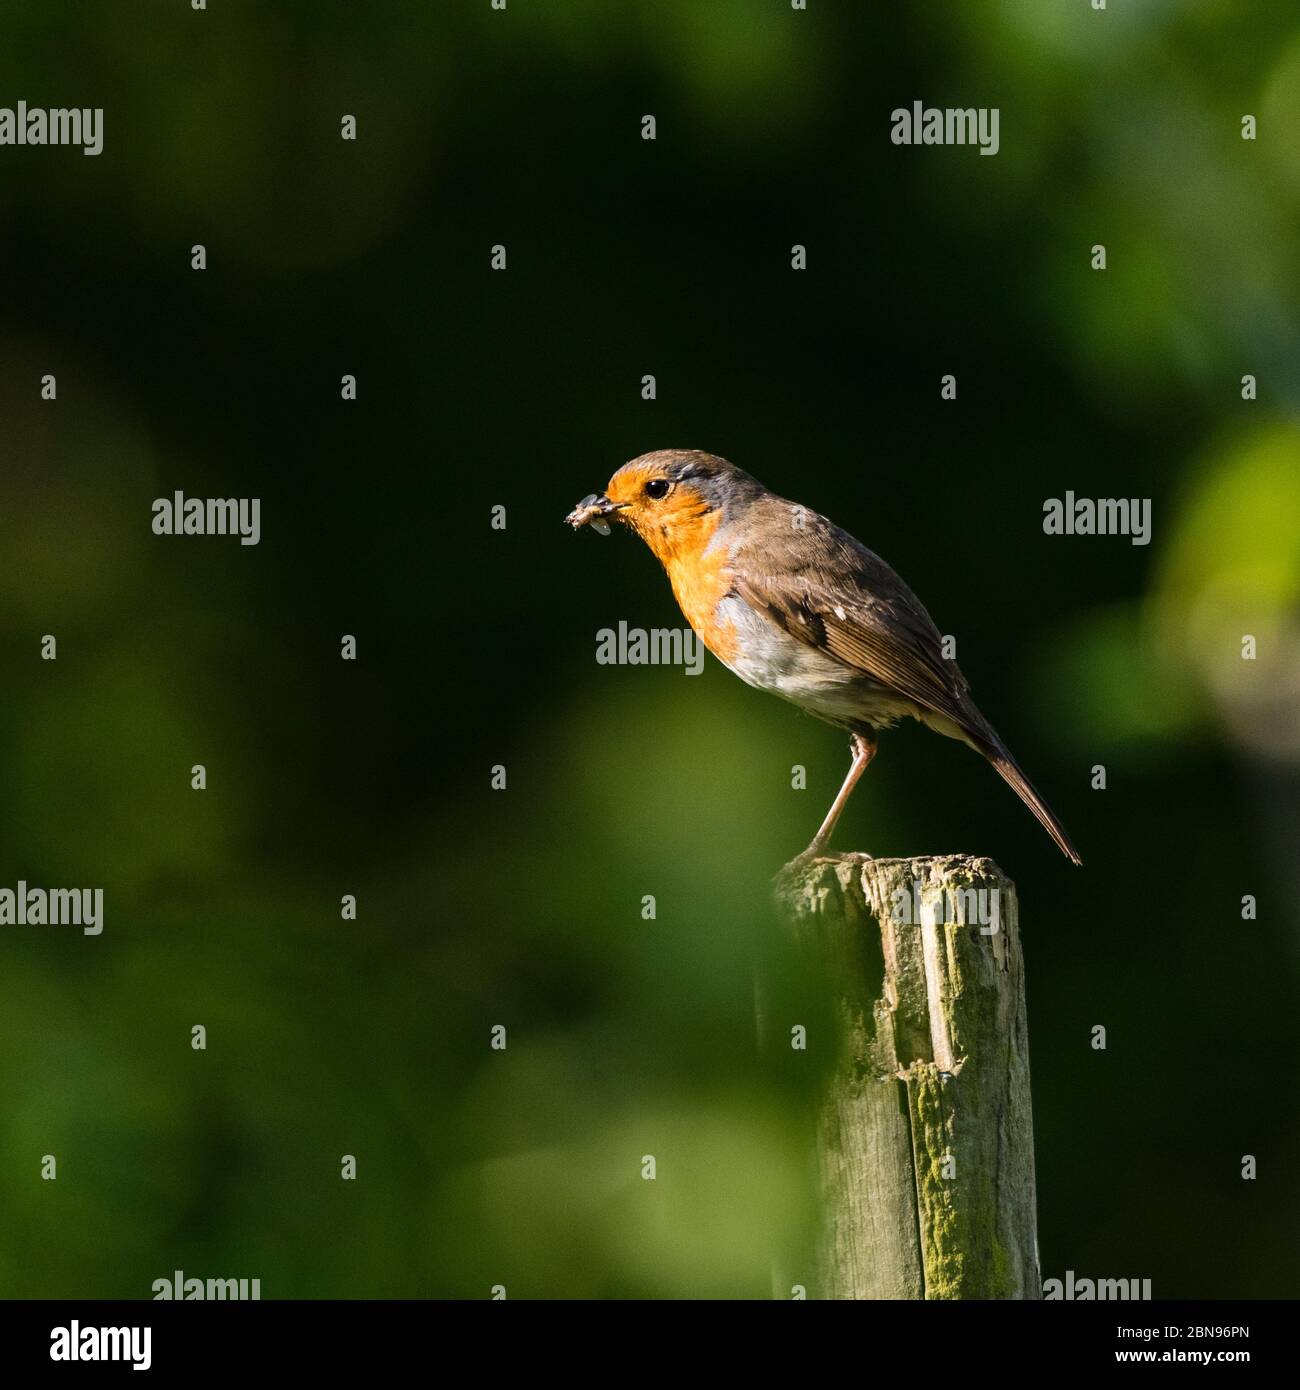 A Robin (Erithacus rubecula) in the Uk Stock Photo